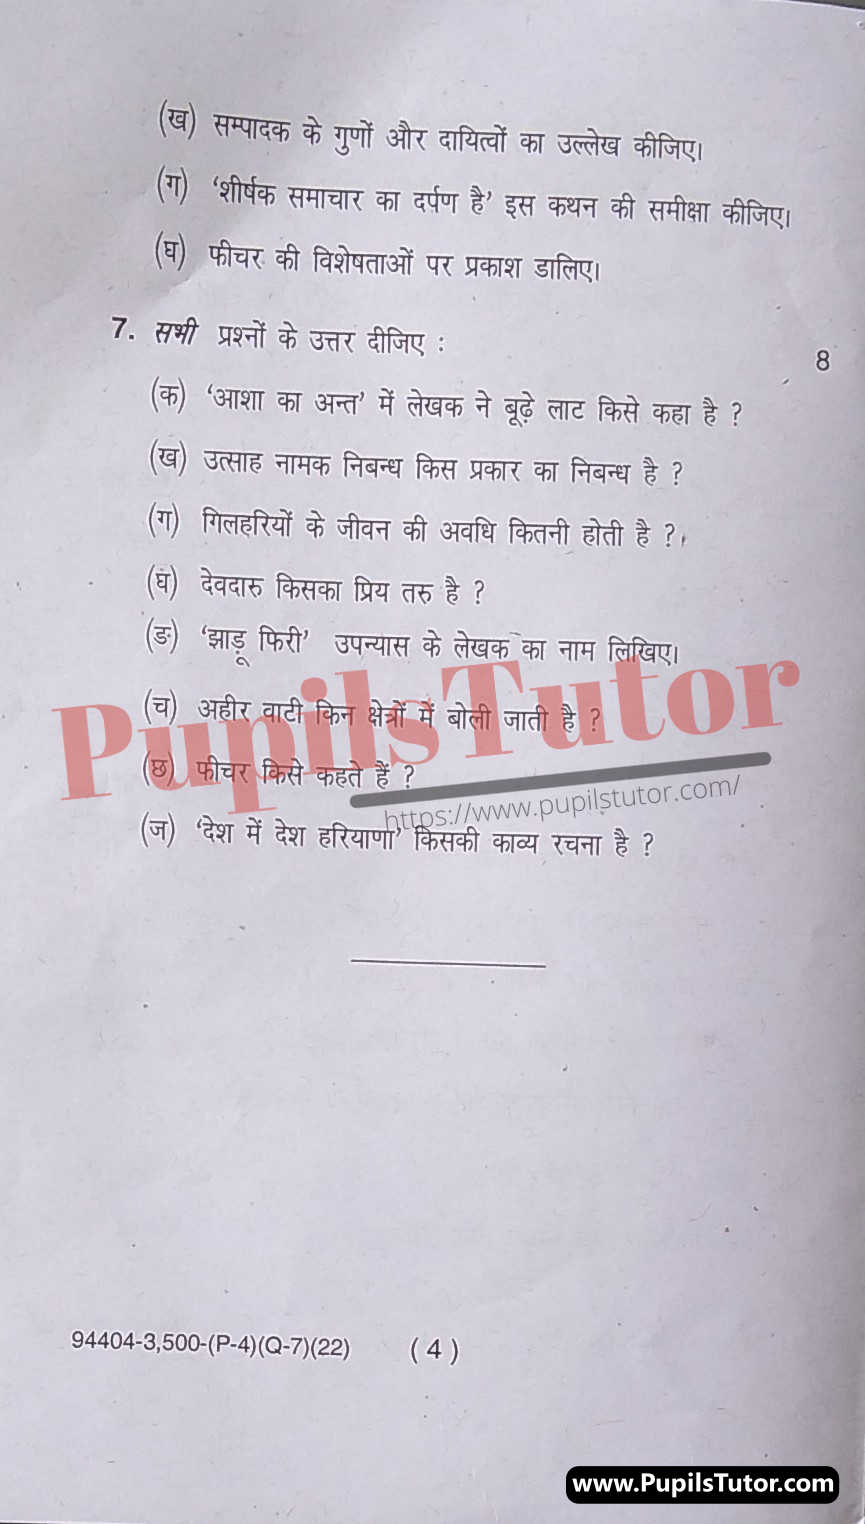 MDU (Maharshi Dayanand University, Rohtak Haryana) Pass Course (B.A. – Bachelor of Arts) Hindi Important Questions Of February, 2022 Exam PDF Download Free (Page 4)